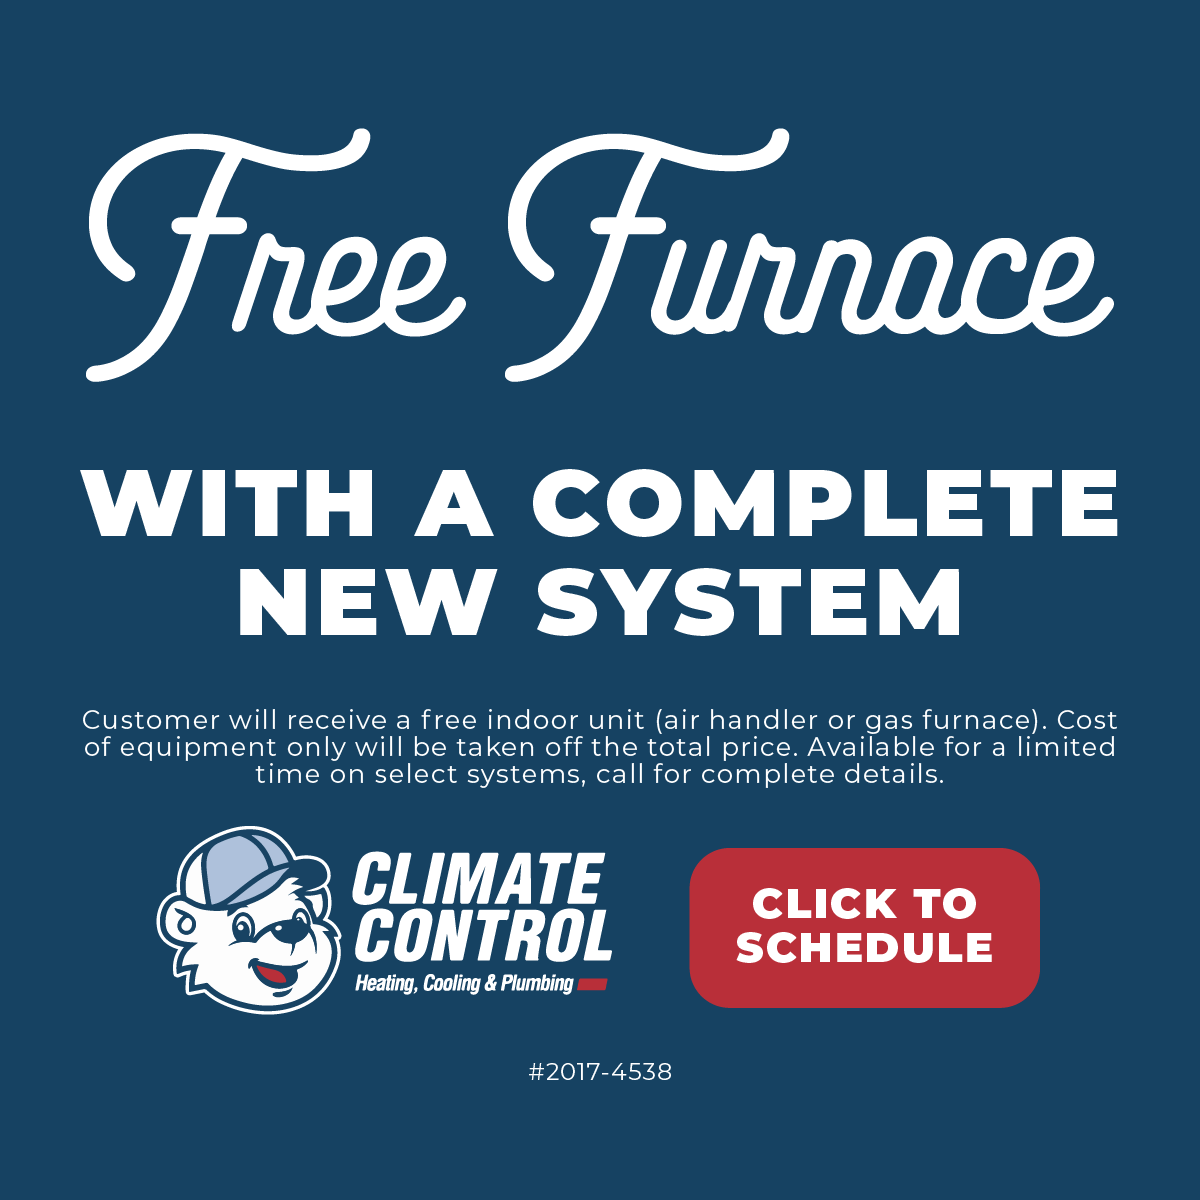 Climate Control Q Offers Tune Up